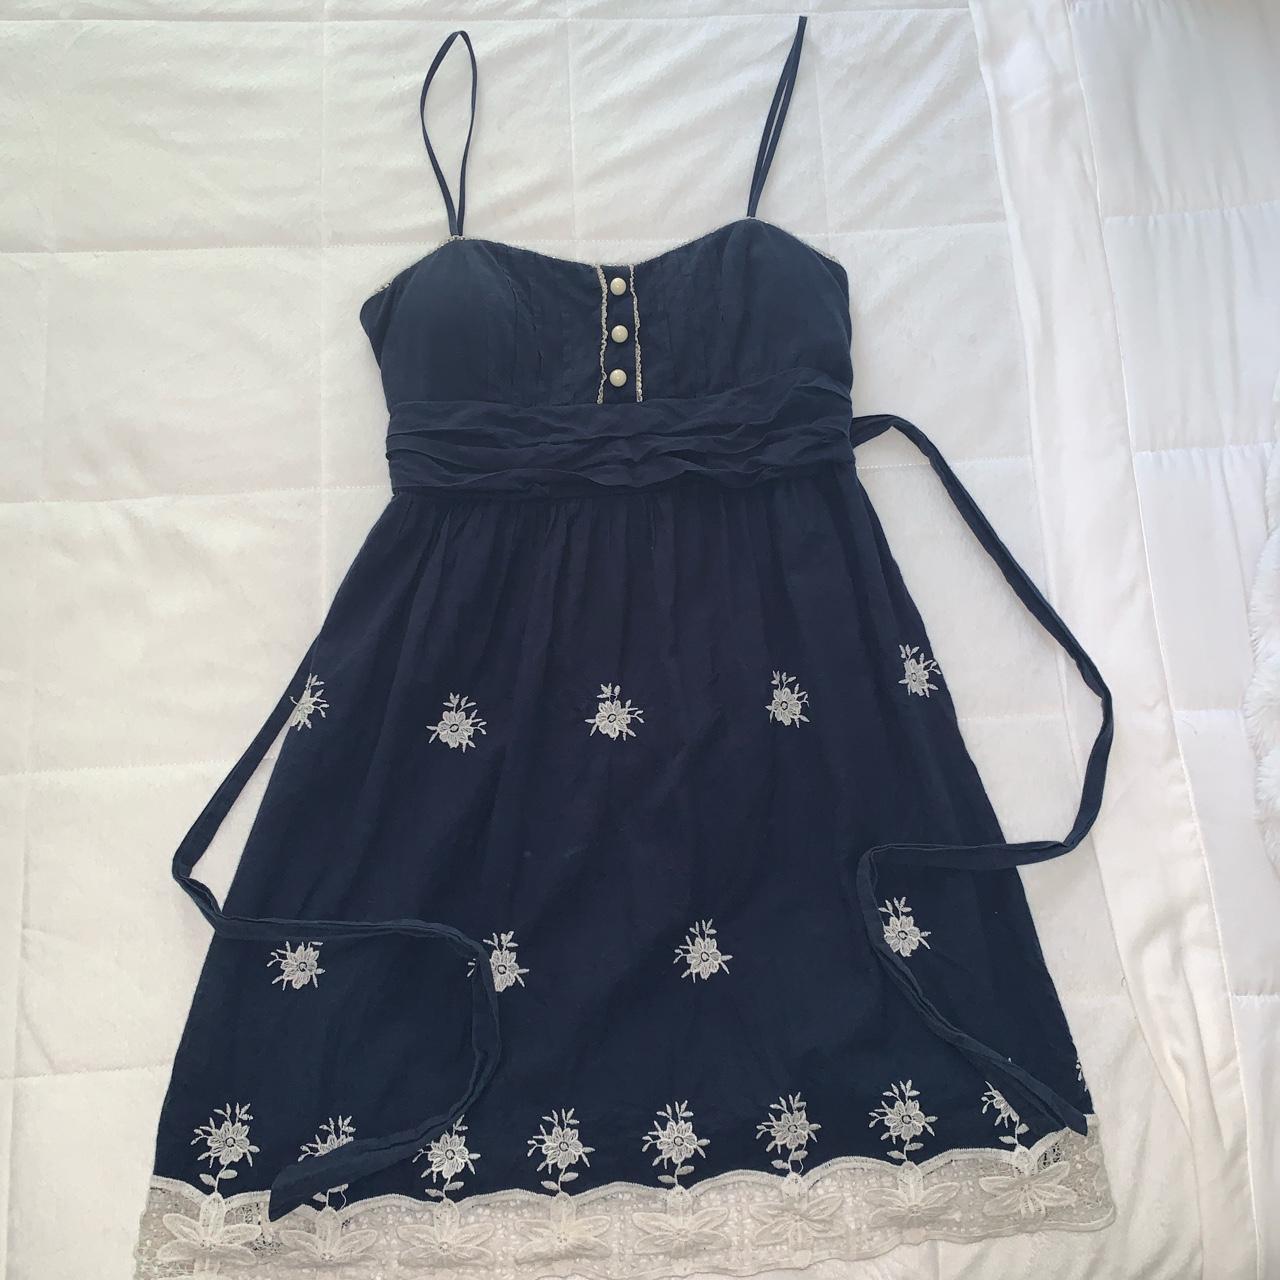 Small City Triangles dress. Could possibly fit a... - Depop